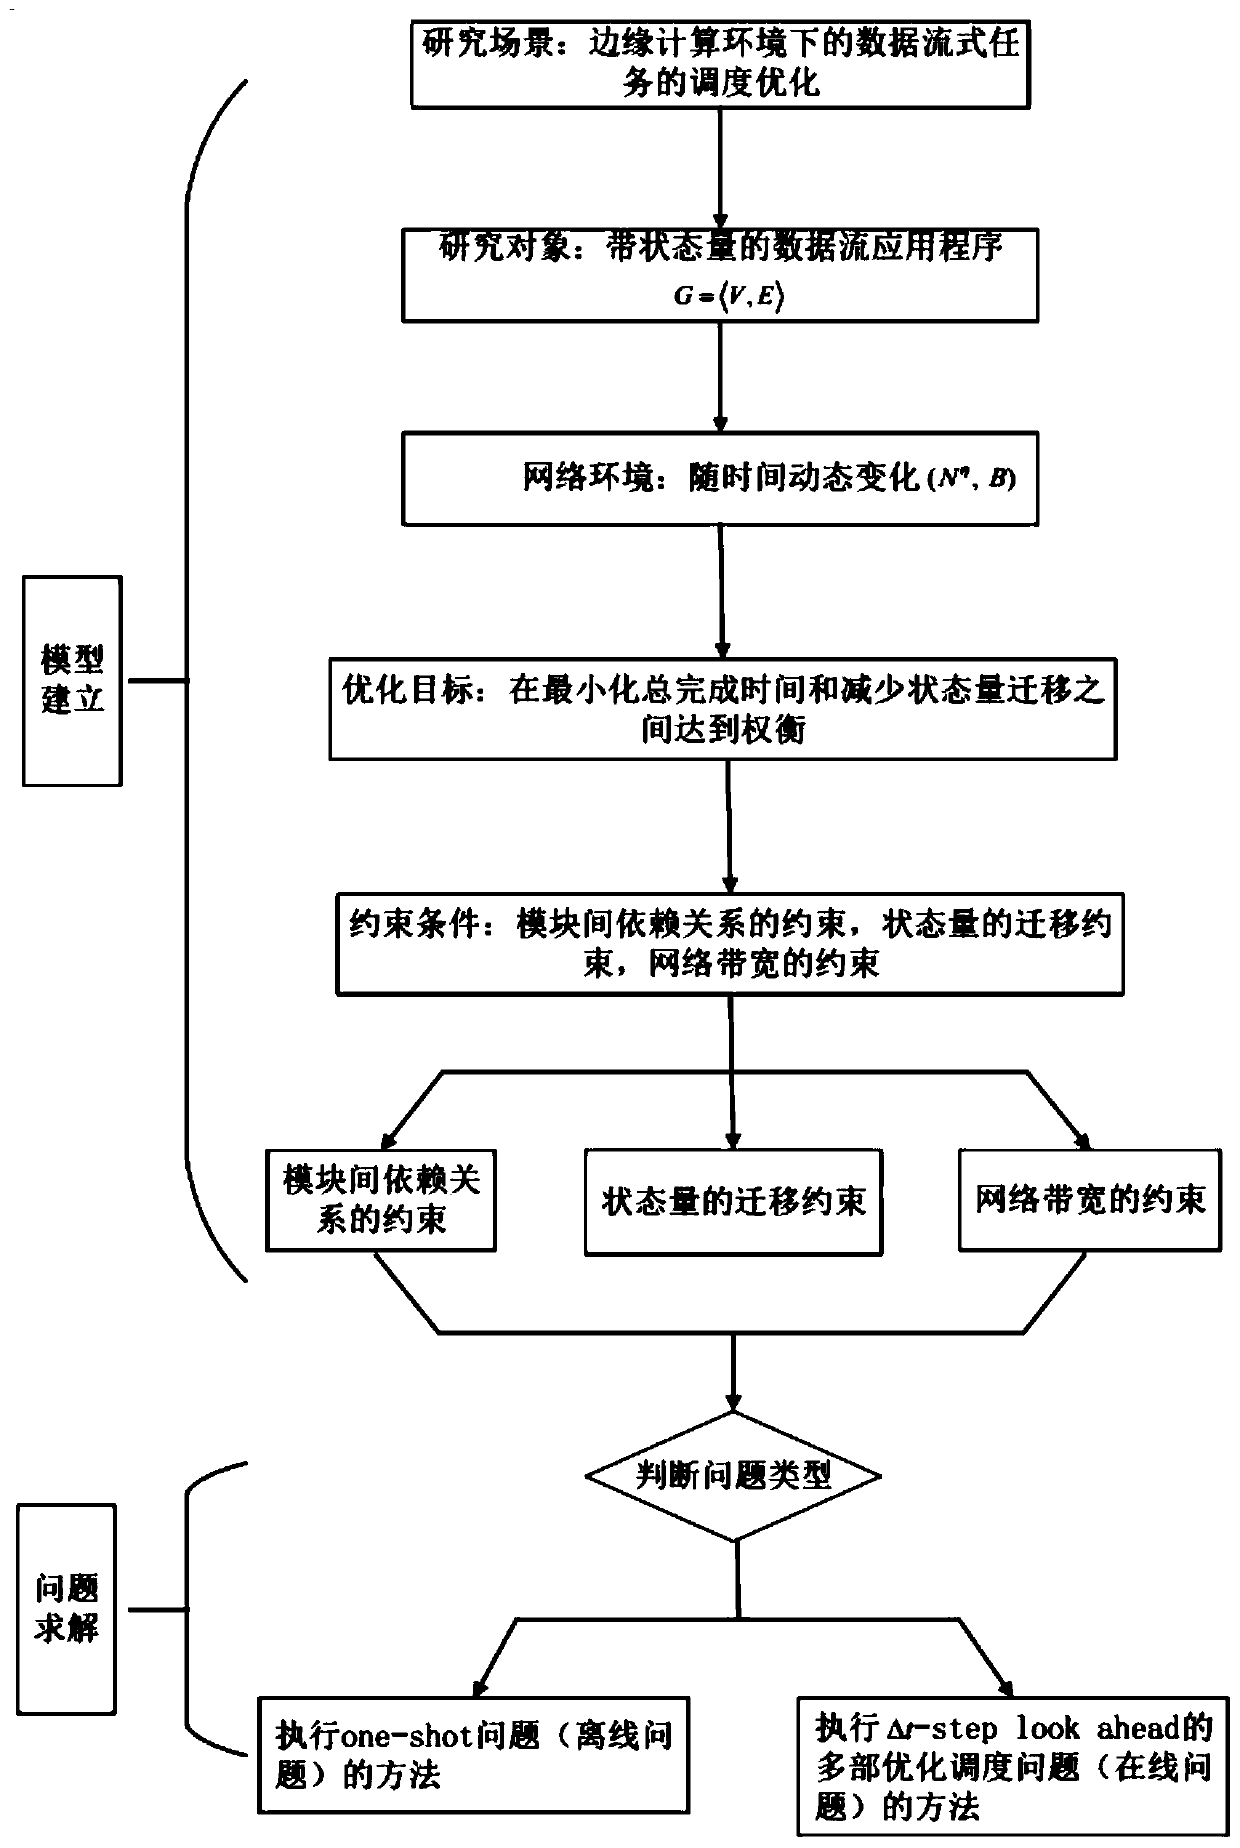 Computing and unloading method for stateful data stream applications